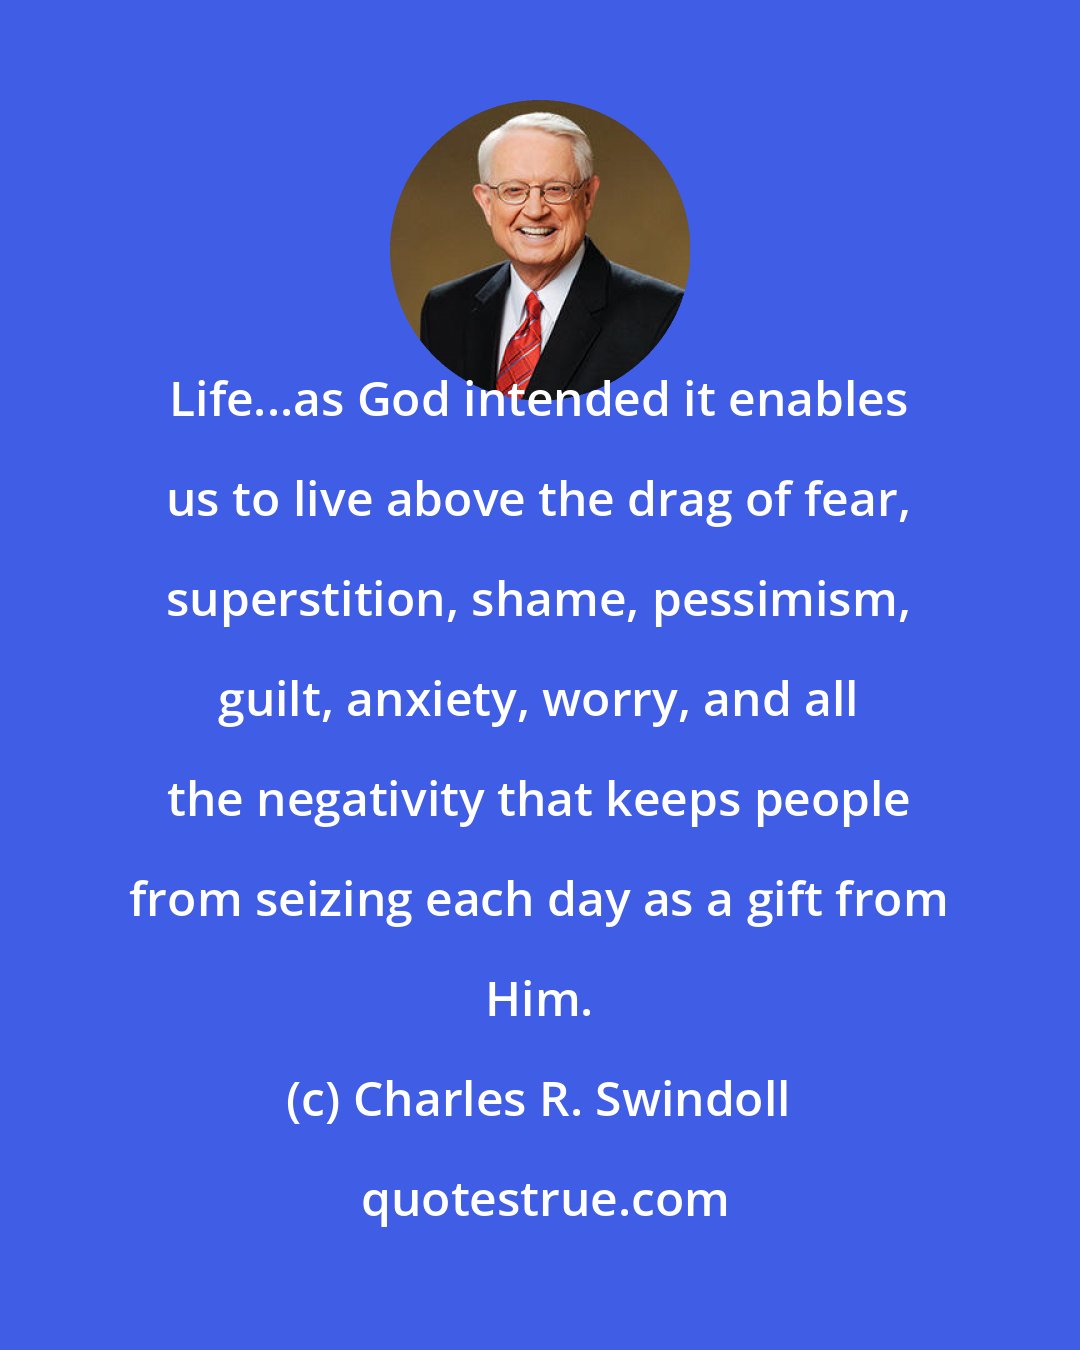 Charles R. Swindoll: Life...as God intended it enables us to live above the drag of fear, superstition, shame, pessimism, guilt, anxiety, worry, and all the negativity that keeps people from seizing each day as a gift from Him.